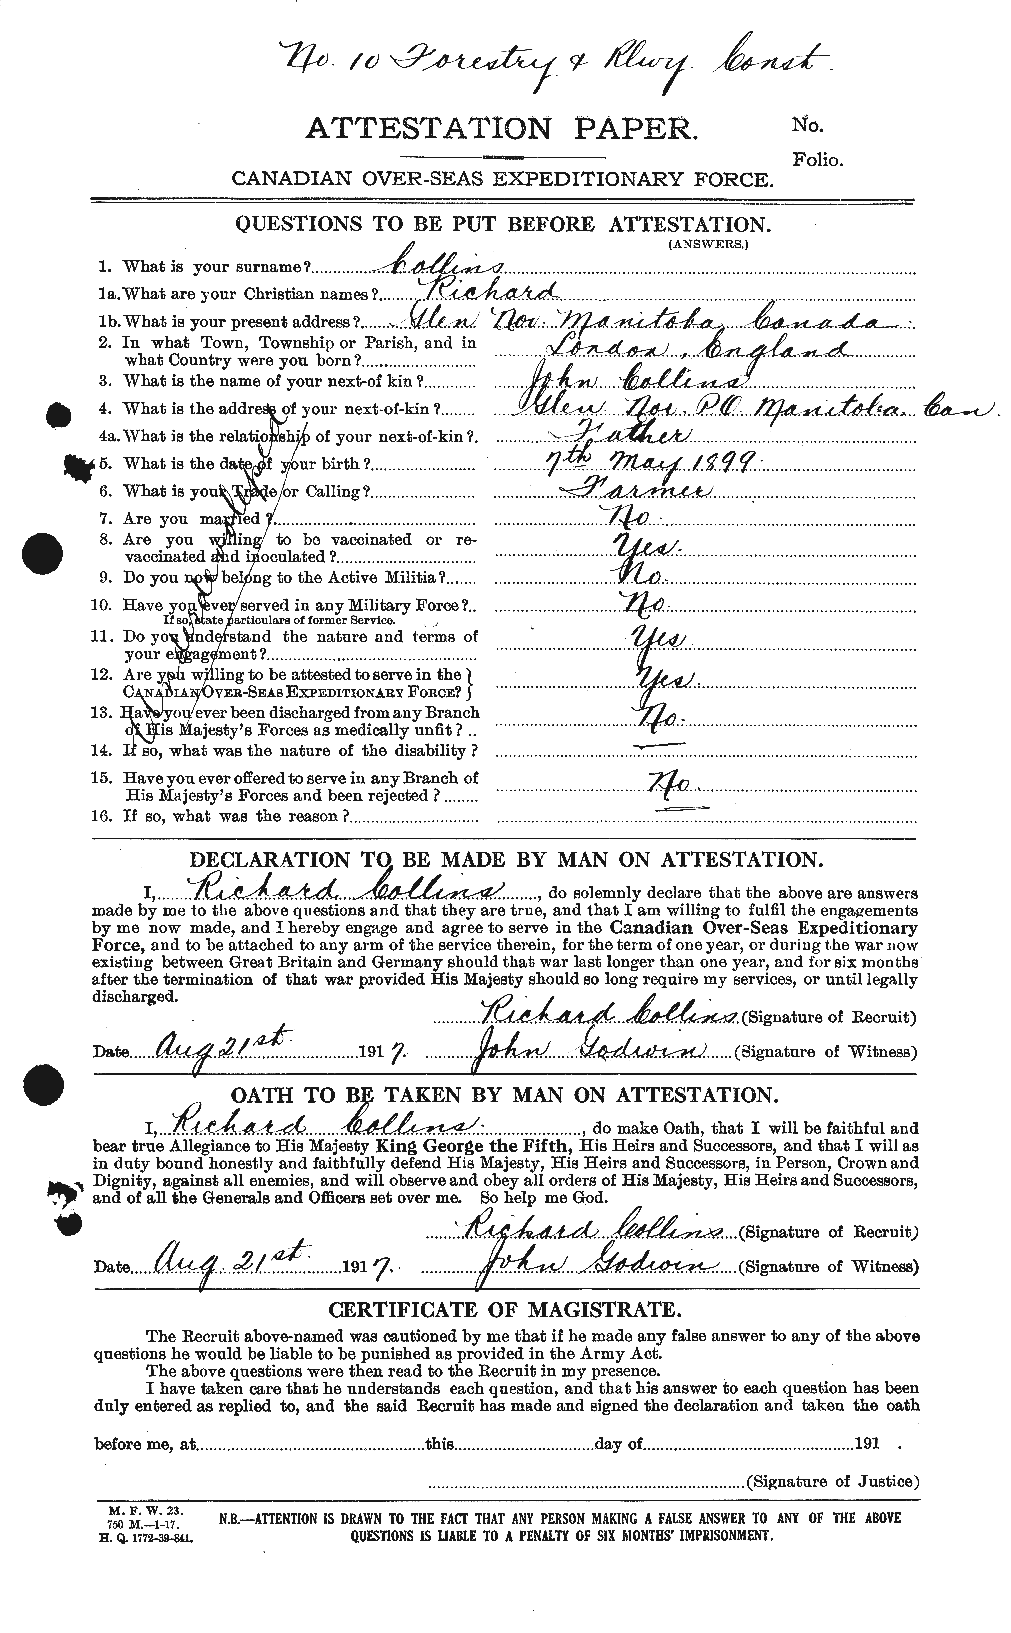 Personnel Records of the First World War - CEF 069285a